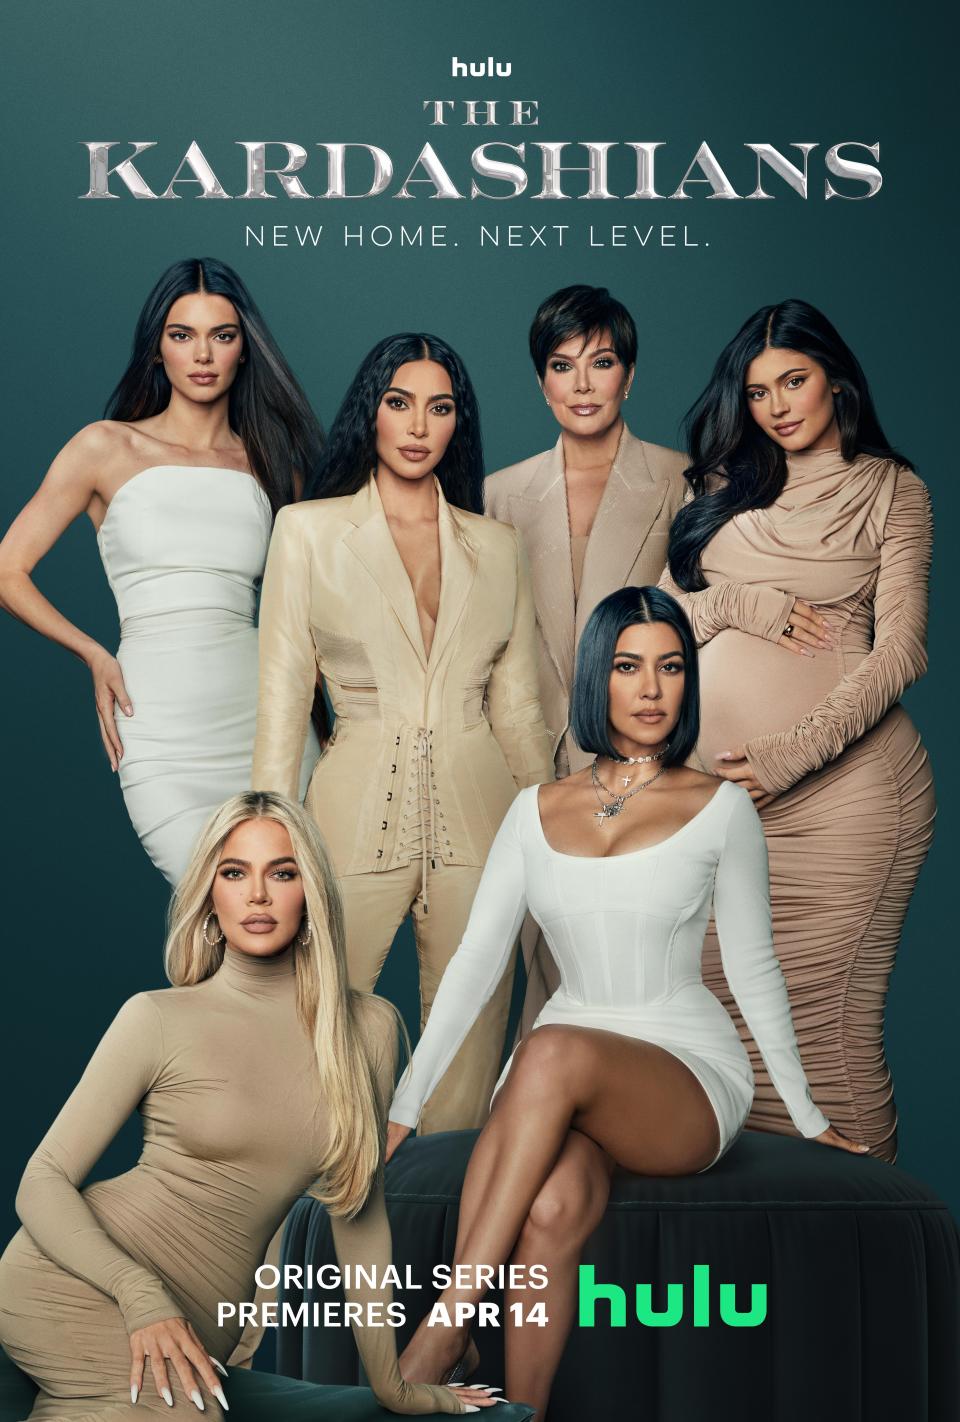 The Kardashians -- The Kardashian-Jenner family bring the cameras back to reveal the raw, intimate reality of life and love in the spotlight like never before. Kris Jenner, Kourtney Kardashian, Kim Kardashian, Khloé Kardashian, Kendall Jenner and Kylie Jenner, shown. (Courtesy of Hulu)